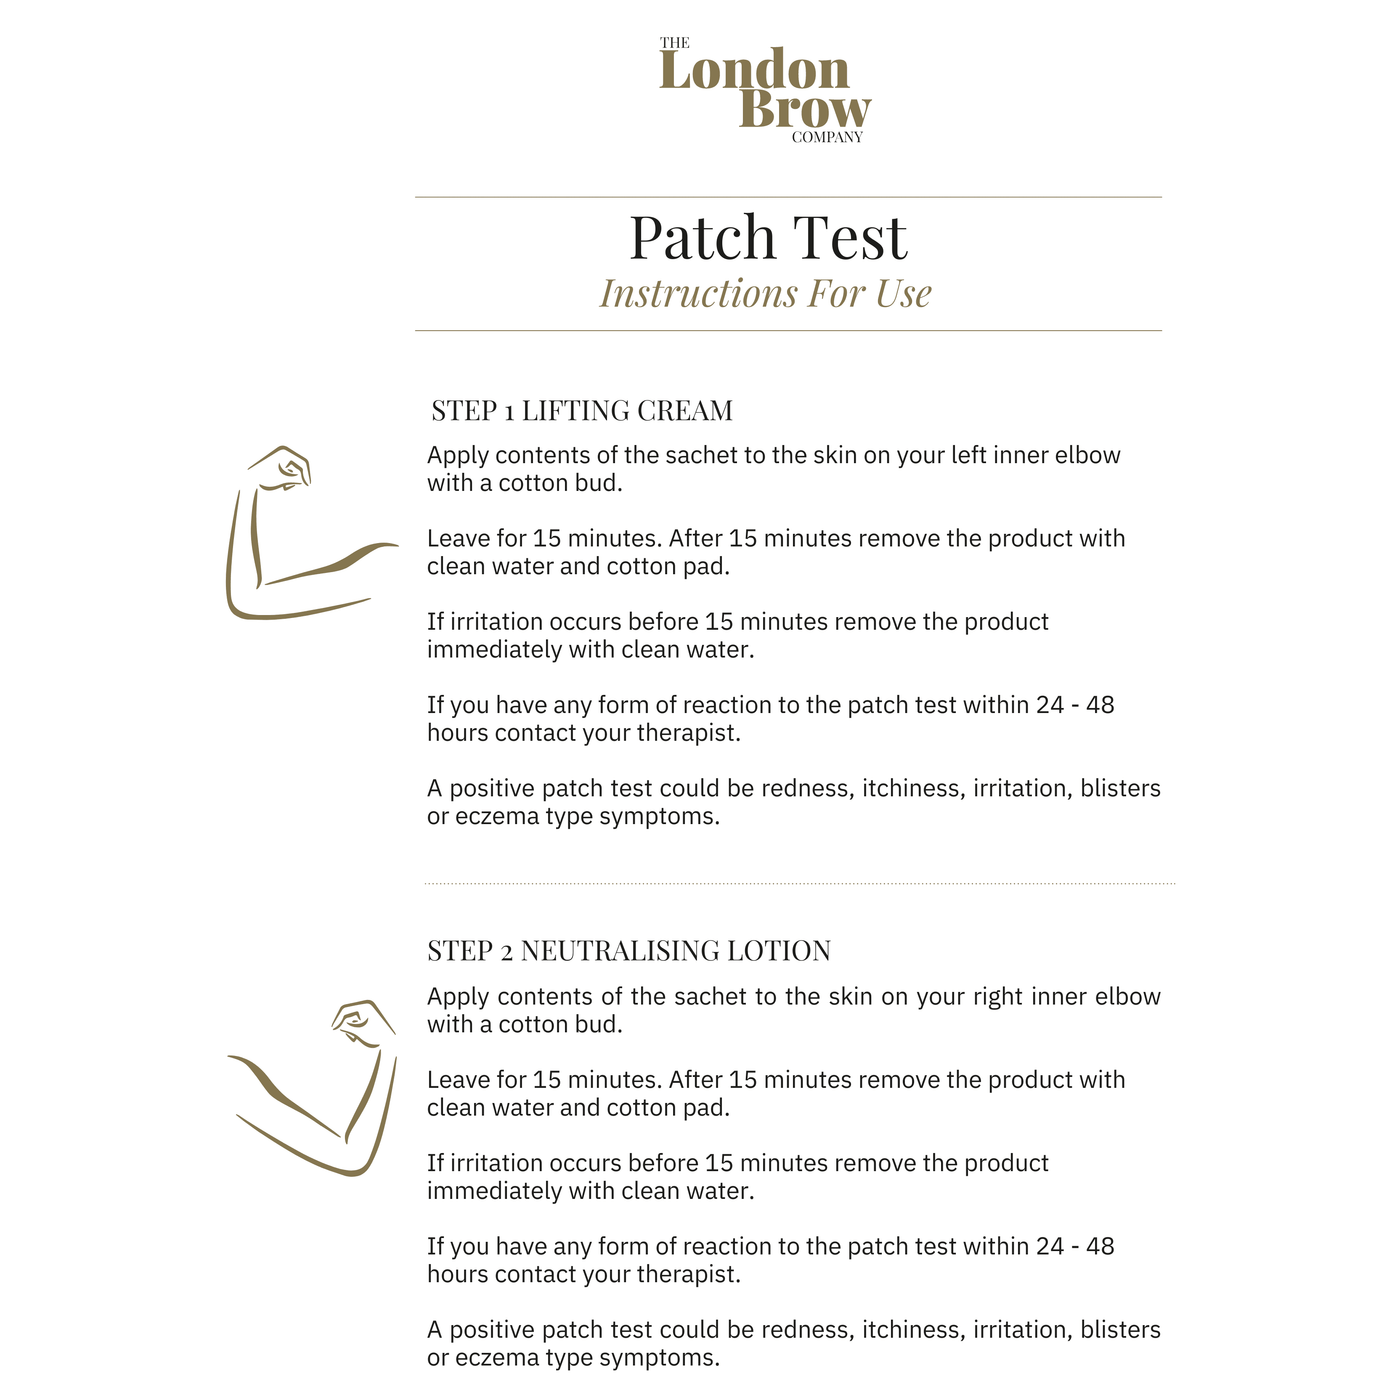 Client Patch Test Instructions London Brow Lamination - The London Brow Company